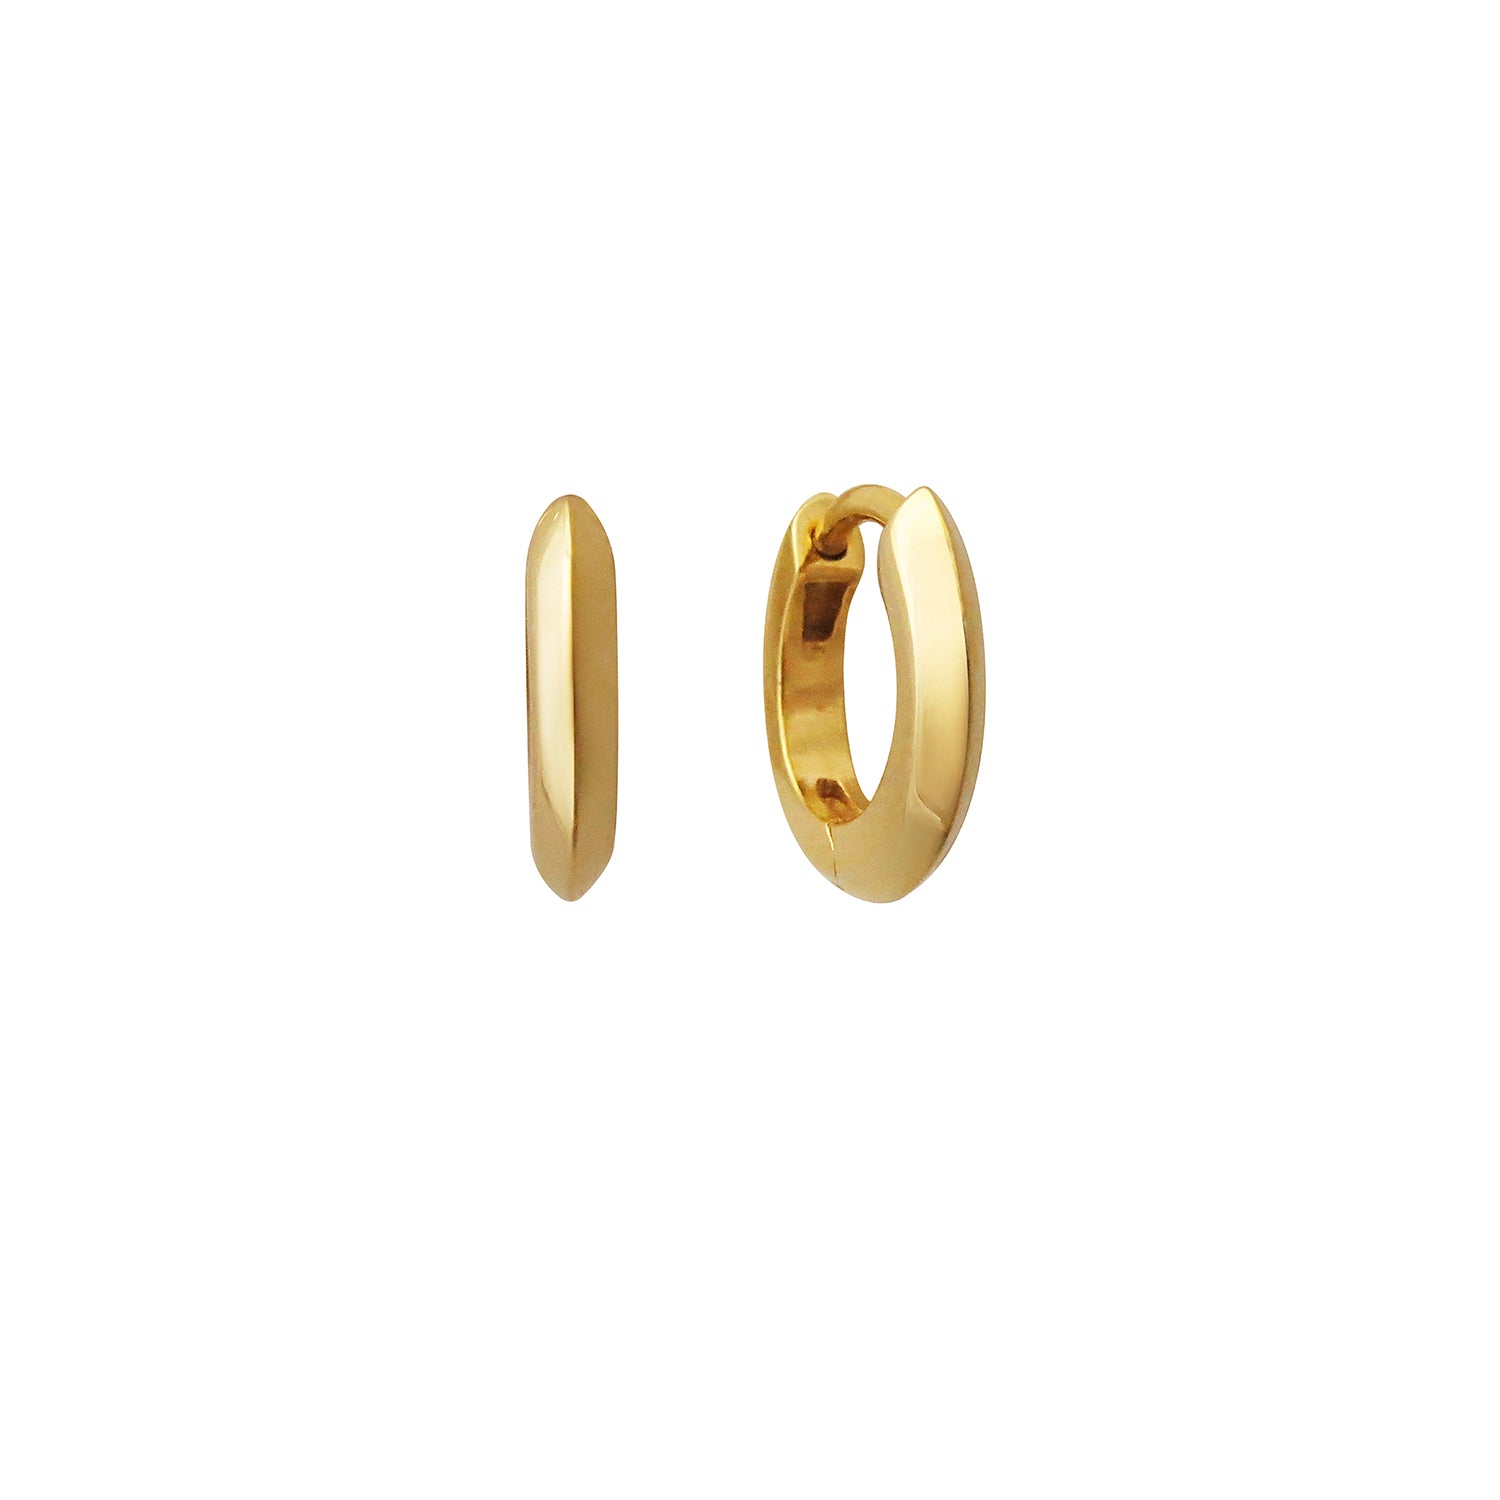 The 10mm Knife Edge Huggie Hoop Earrings by East London jeweller Rachel Boston | Discover our collections of unique and timeless engagement rings, wedding rings, and modern fine jewellery.